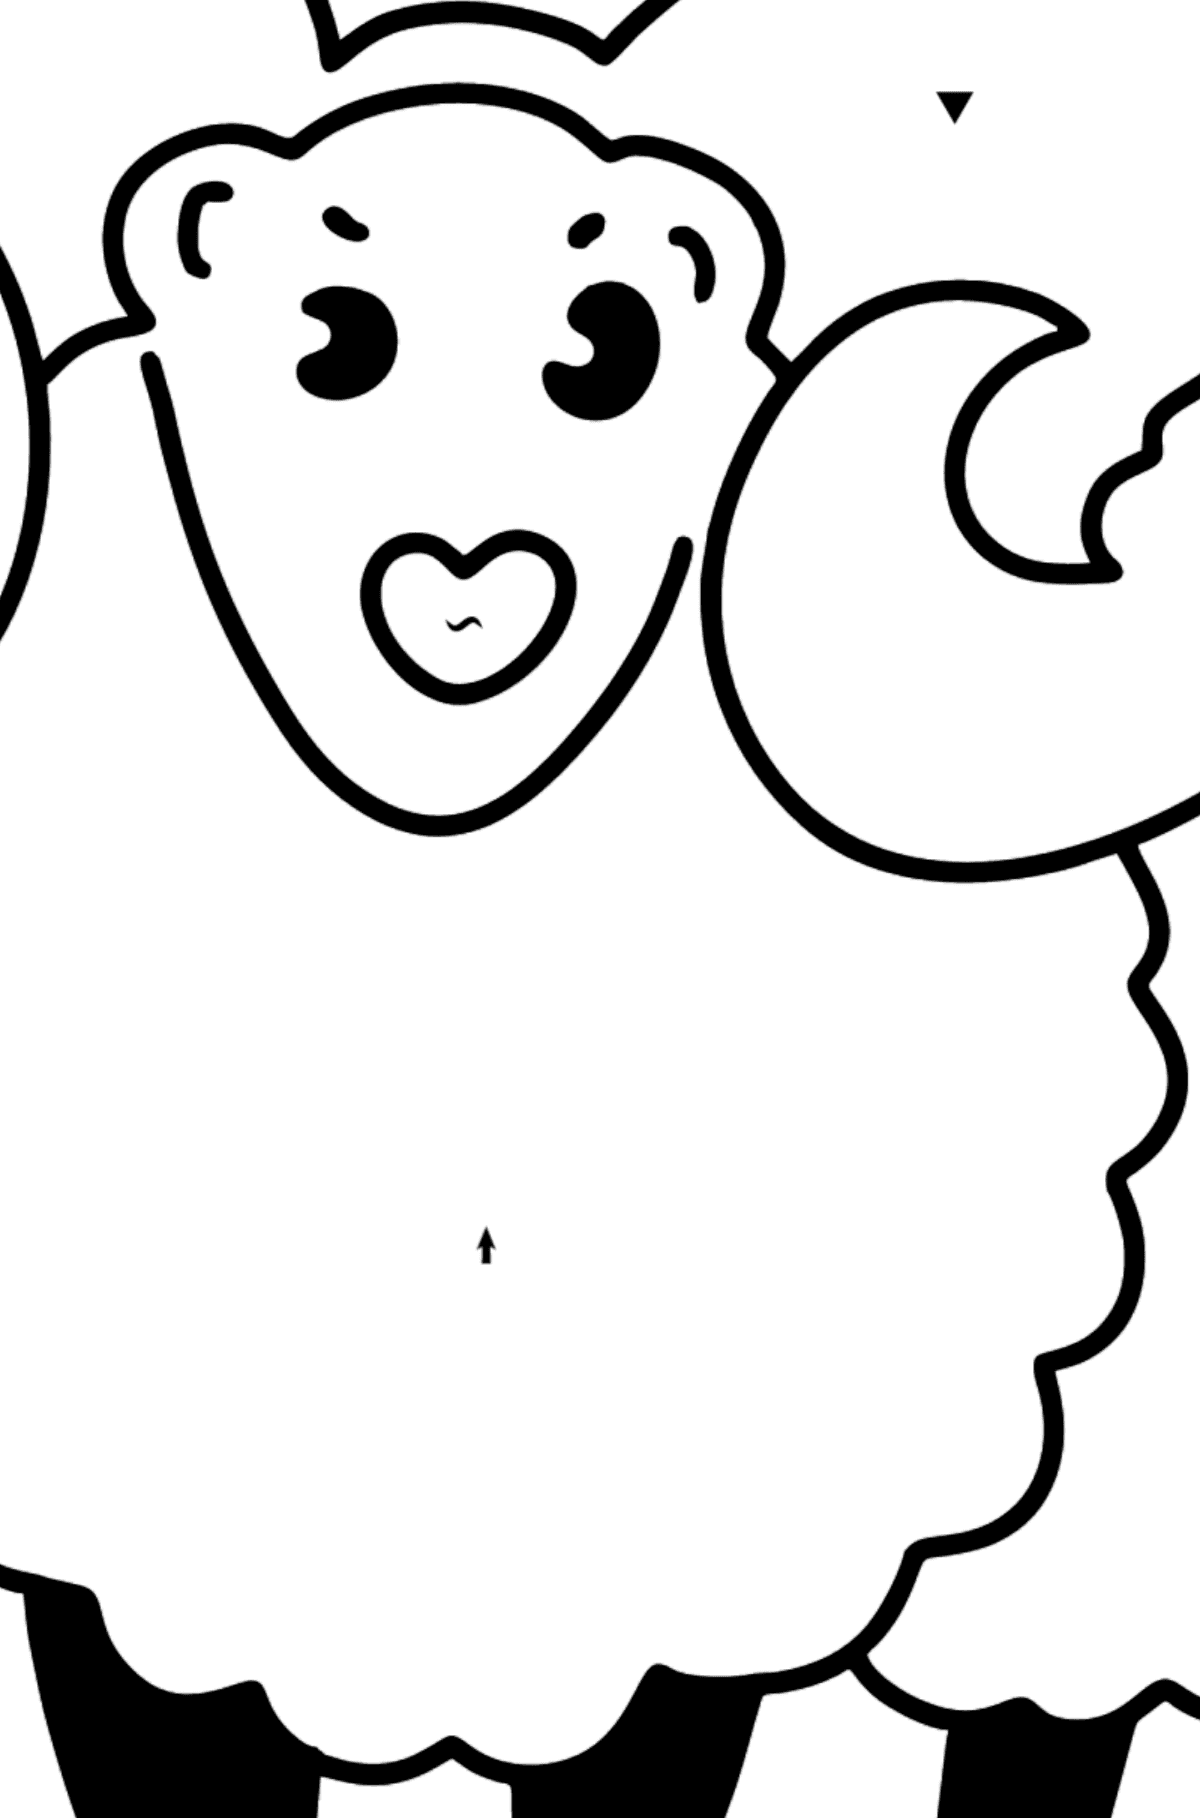 Home Lamb coloring page - Coloring by Symbols for Kids